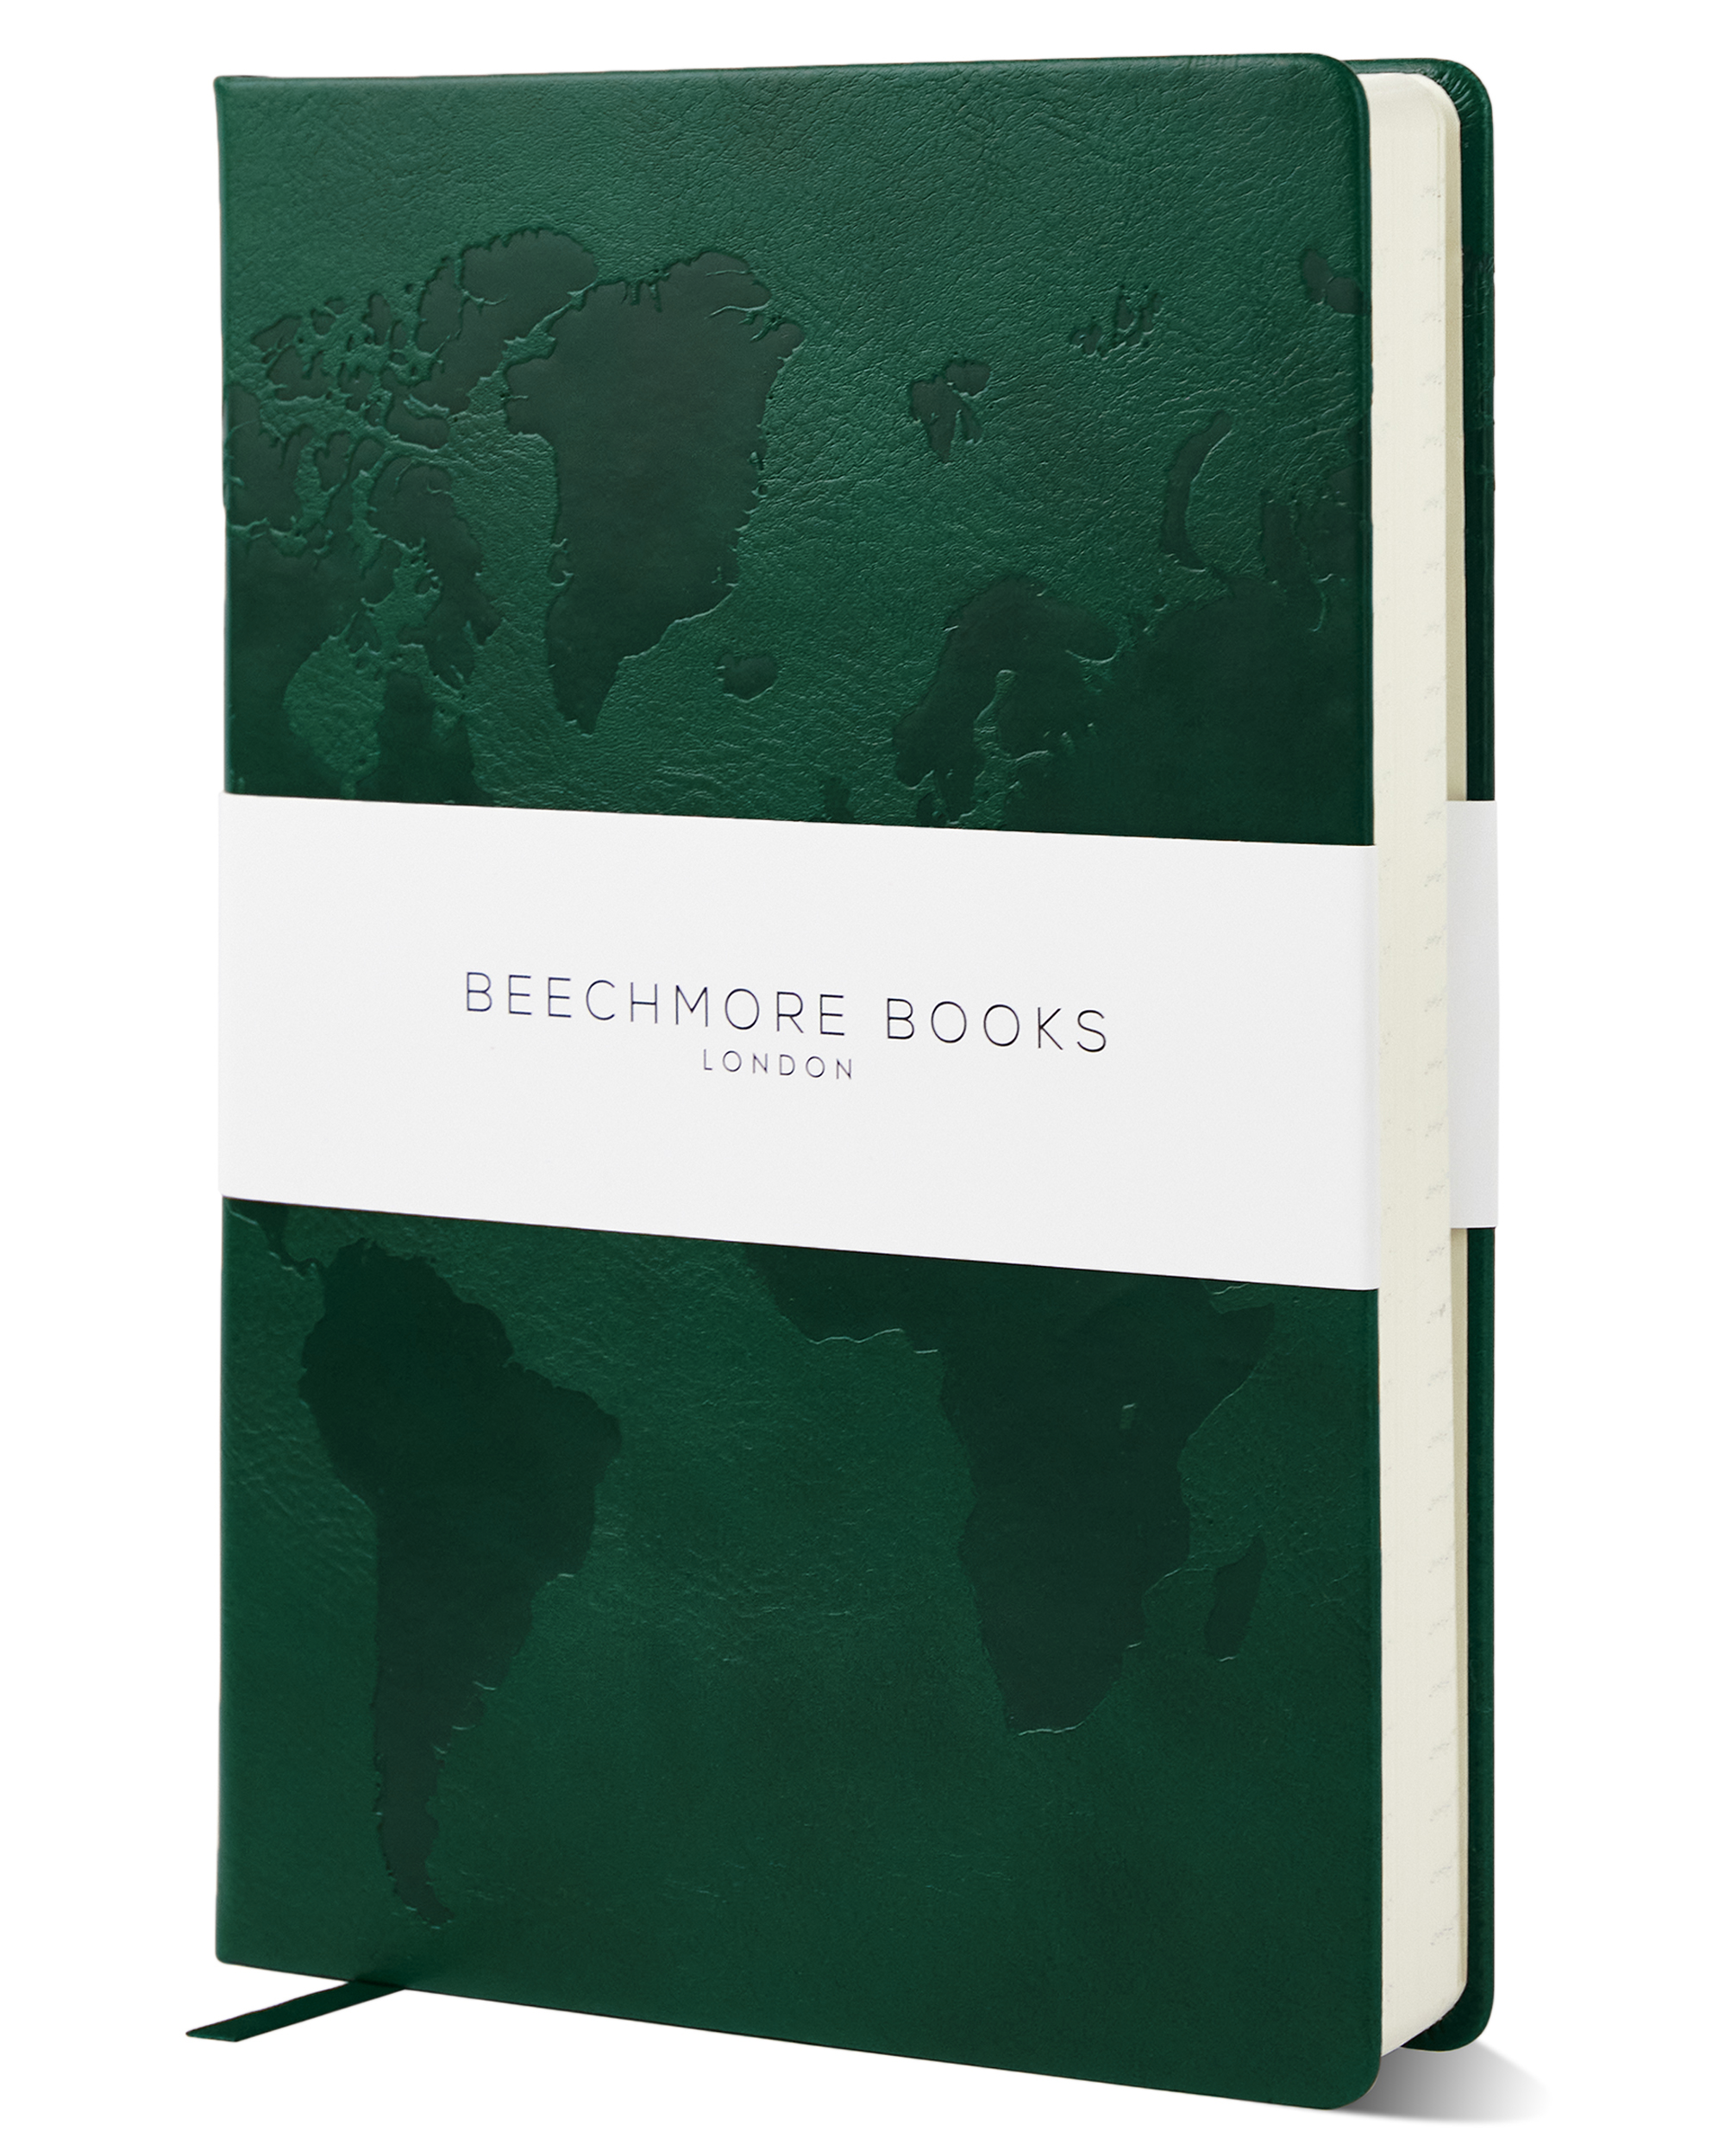 Dartmouth Green A5 travel planner by Beechmore, bringing the vibrancy of nature to your travel plans.